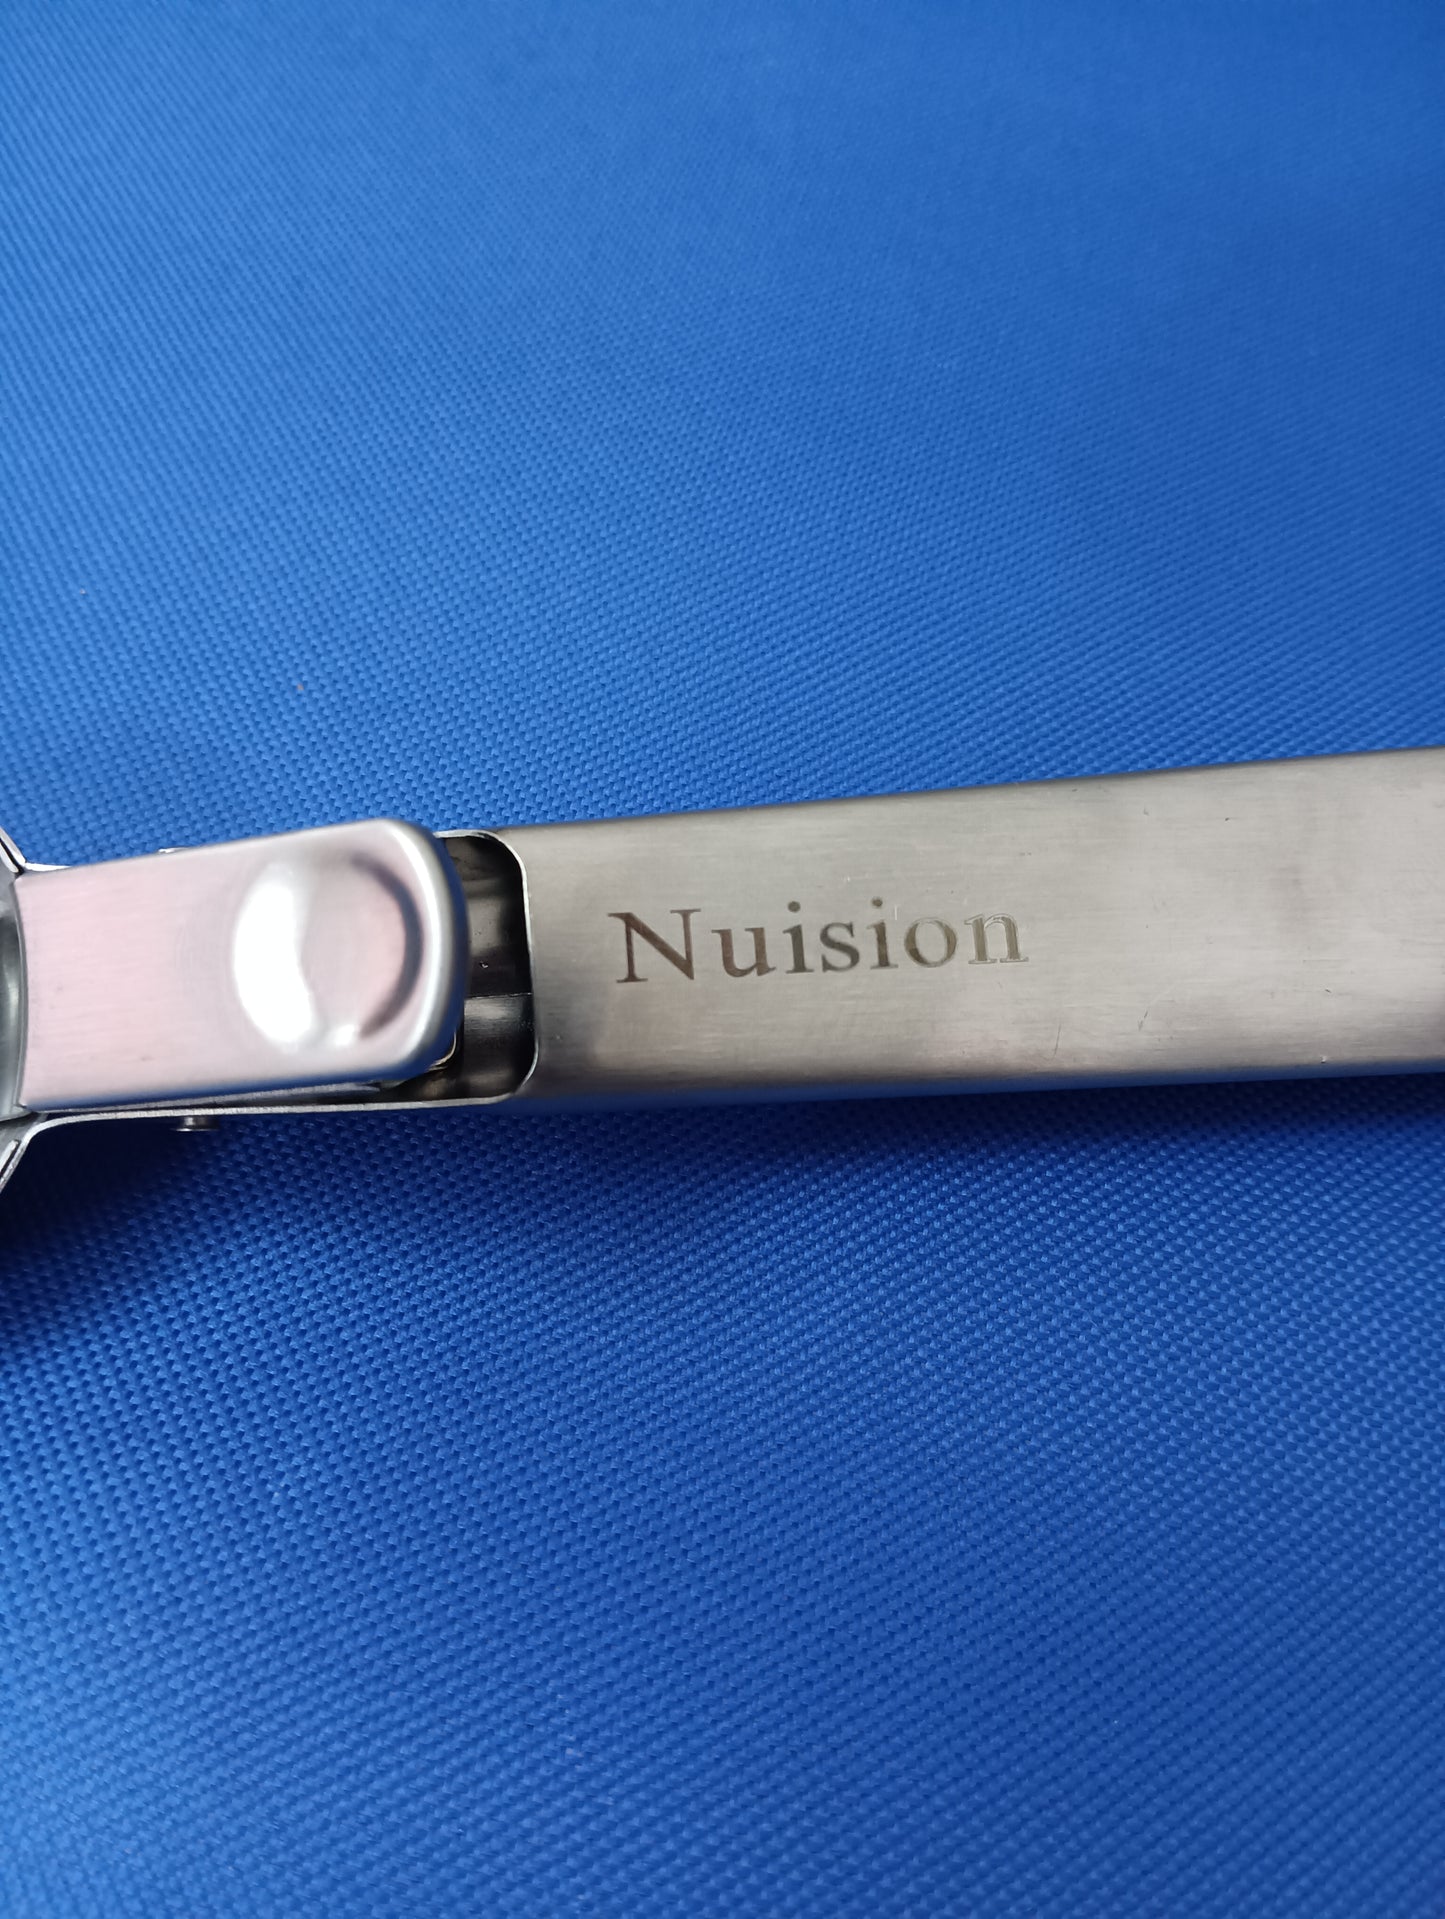 Nuision Ice cream scoops commercial ball scooper stainless steel 304 ice cream scooper digging watermelon fruit ball scoops ice cream artifact ice cream scooper